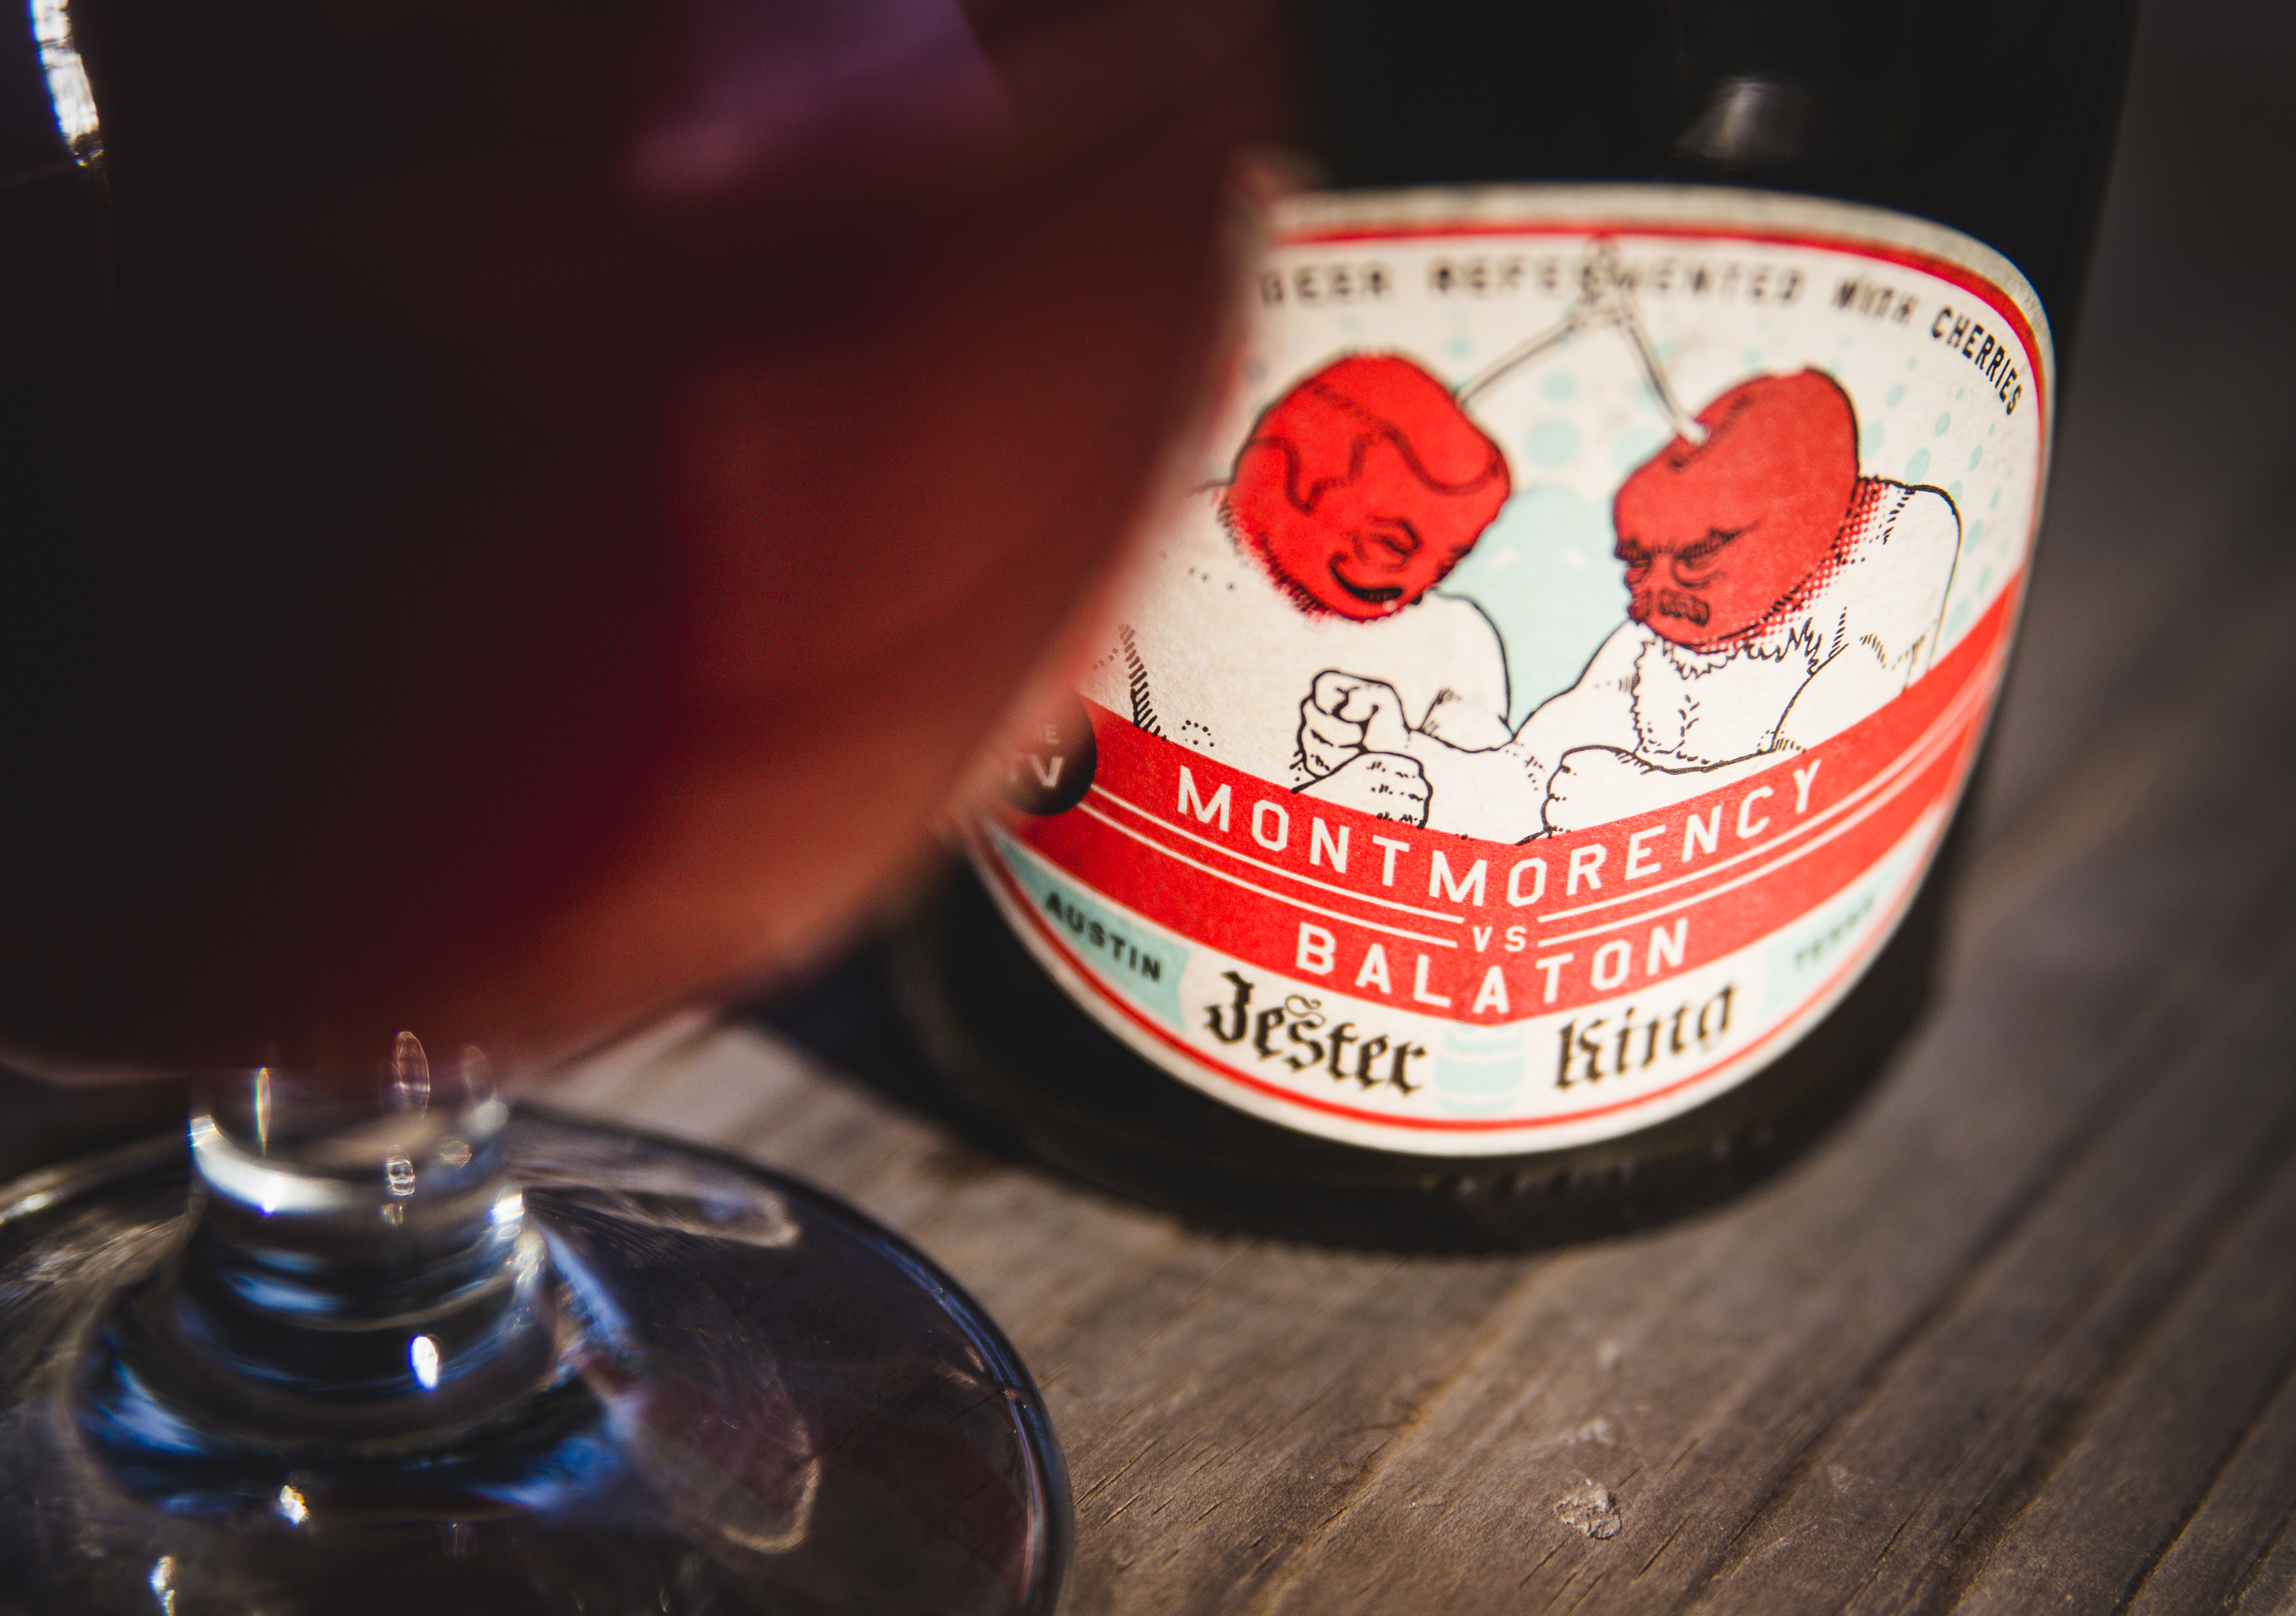 A glass and label art for Jester King's barrel-aged sour cherry ale Montmorency vs. Balaton. Photo courtesy of Jeffrey Stuffings of Jester King Brewery.